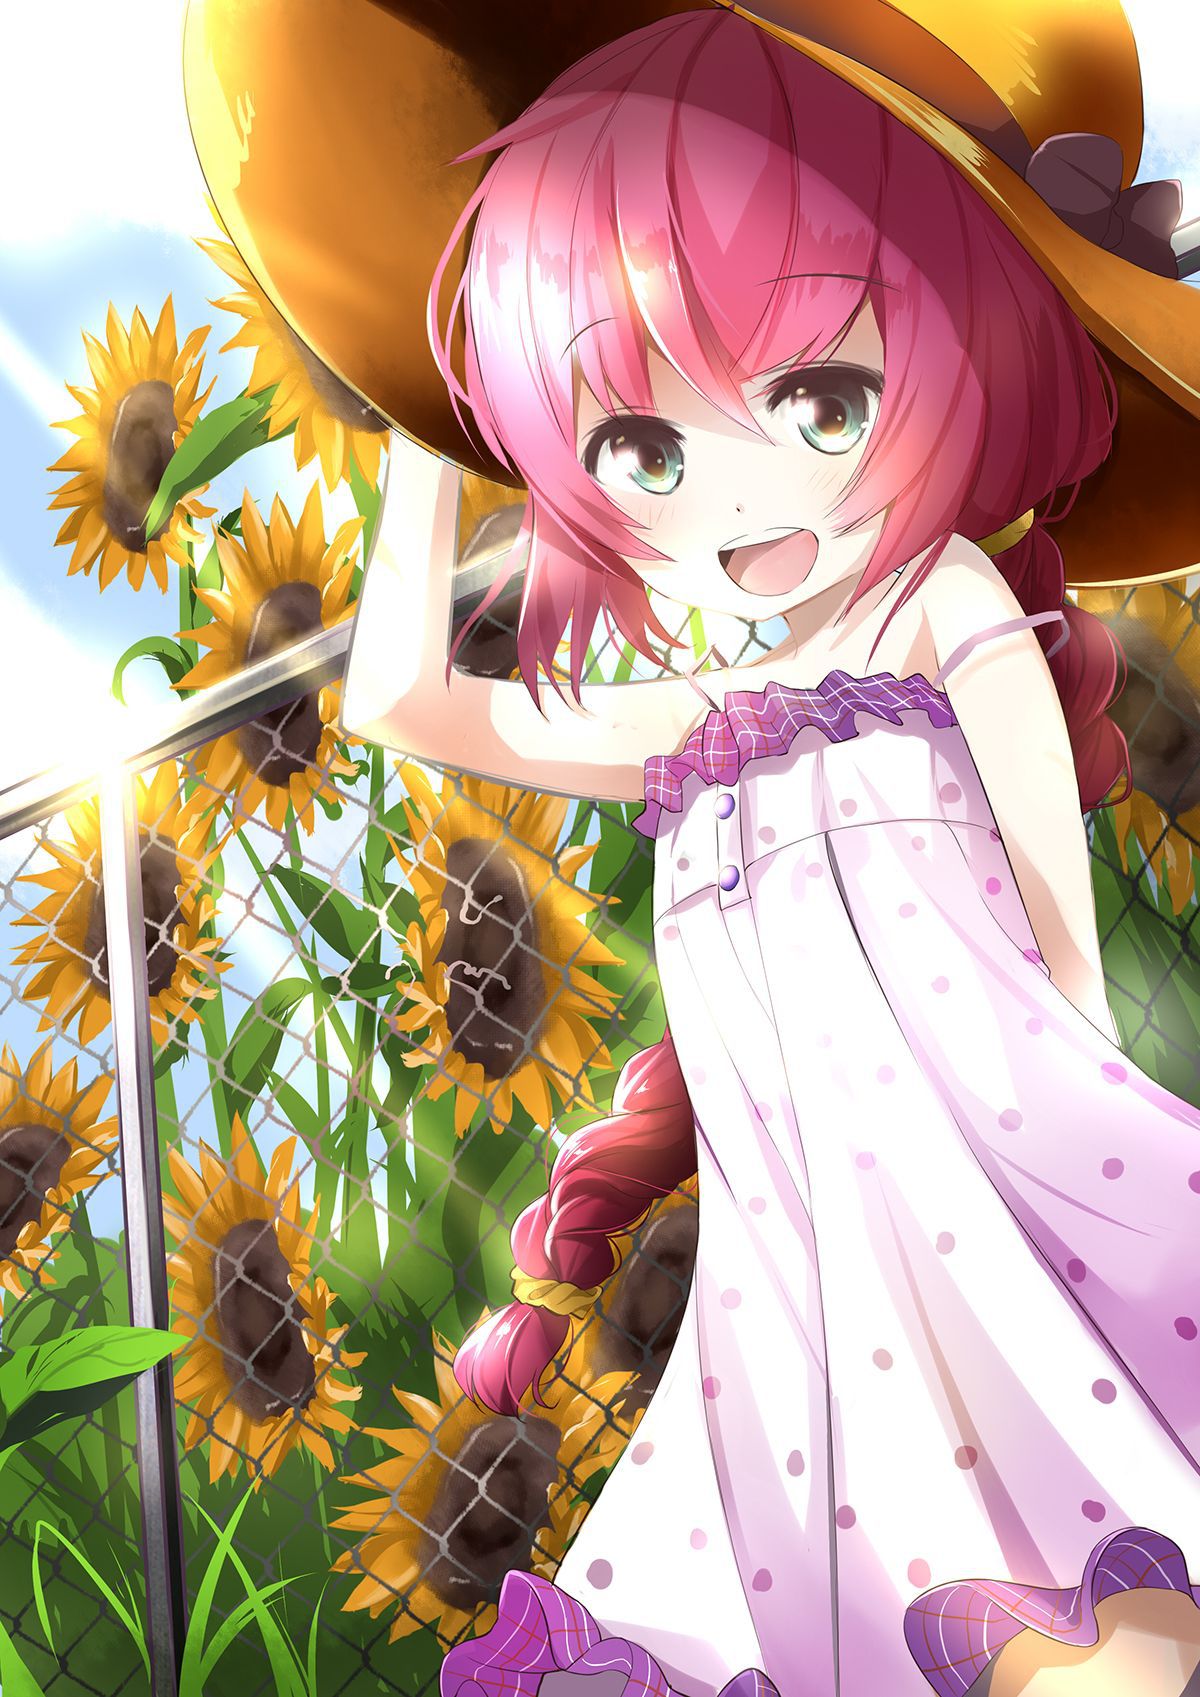 [Secondary, ZIP] summer 2: girl with a sunflower or image summary 15